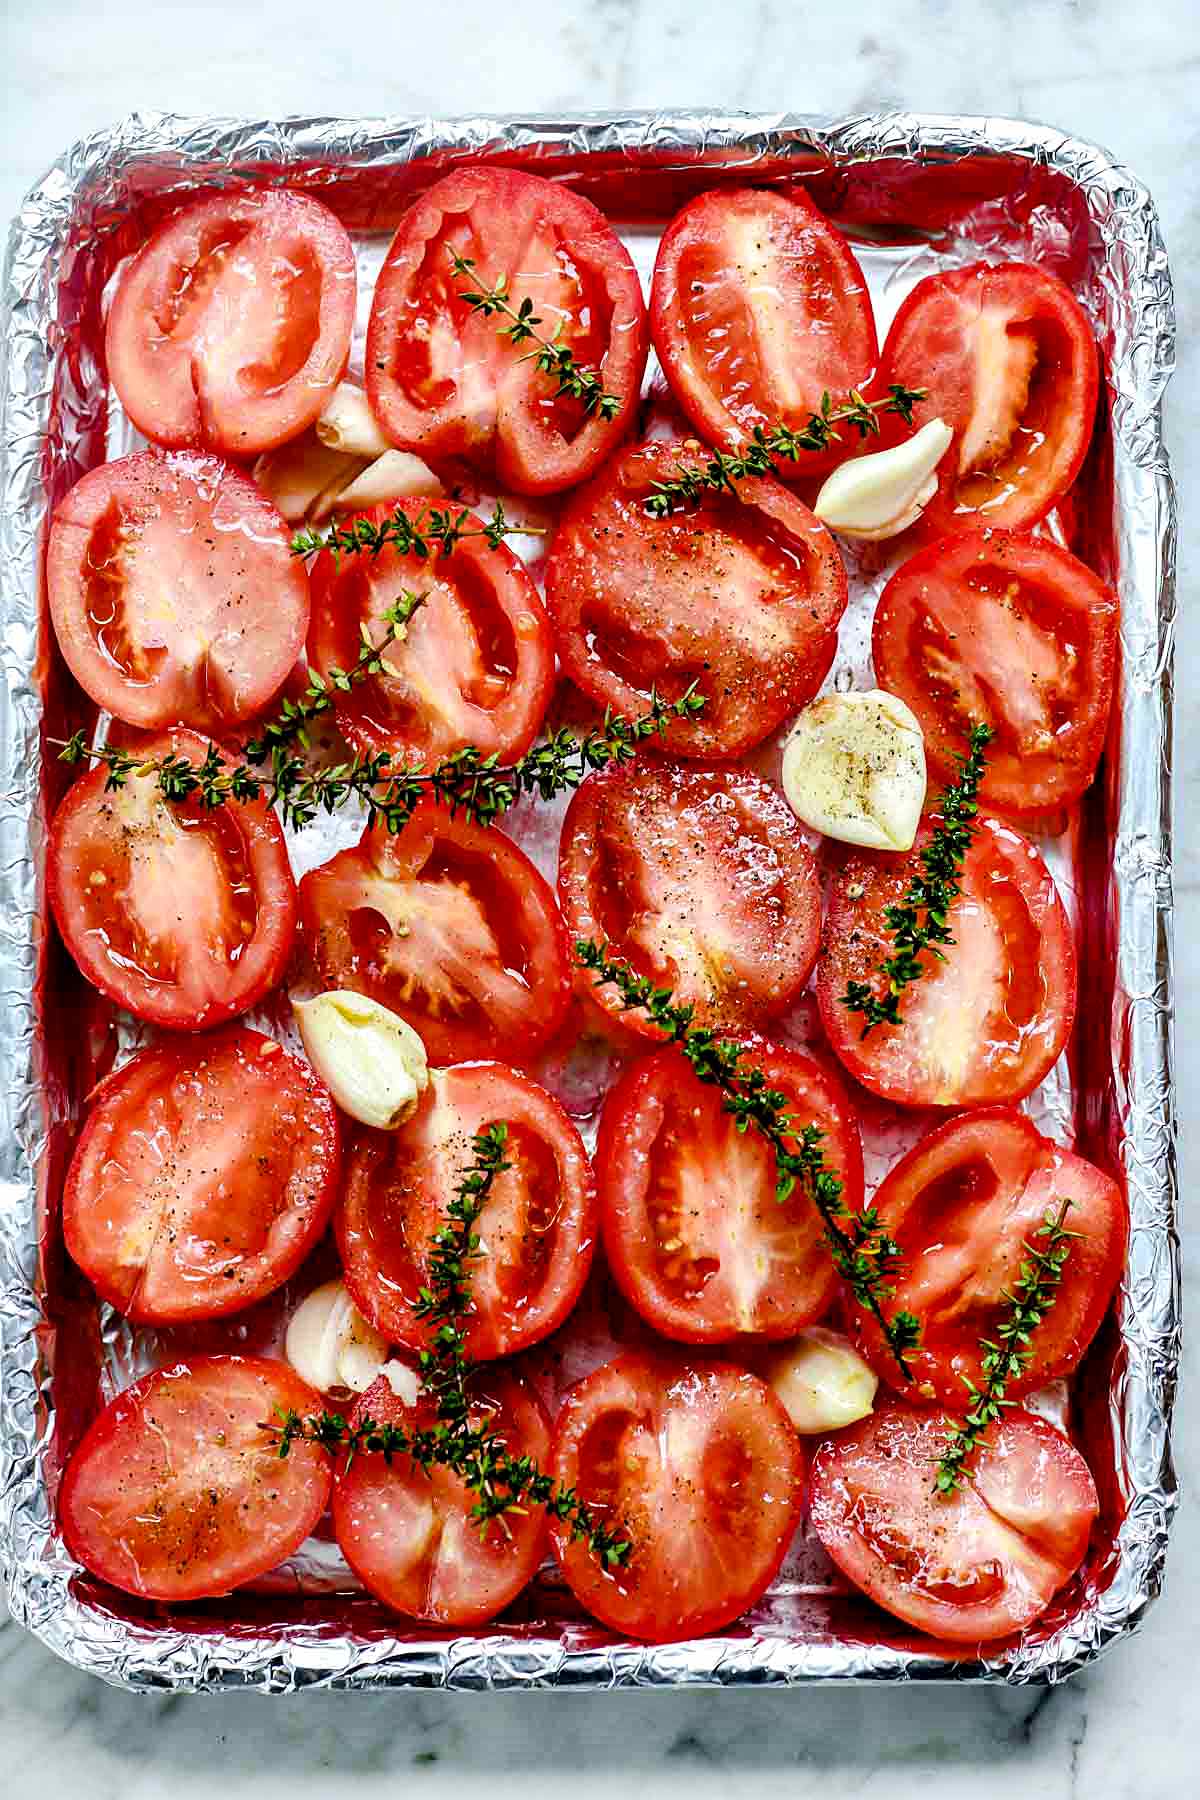 Roasted Tomatoes in the Oven | foodiecrush.com #oven #cherry #tomatoes #roasted #recipe #quick